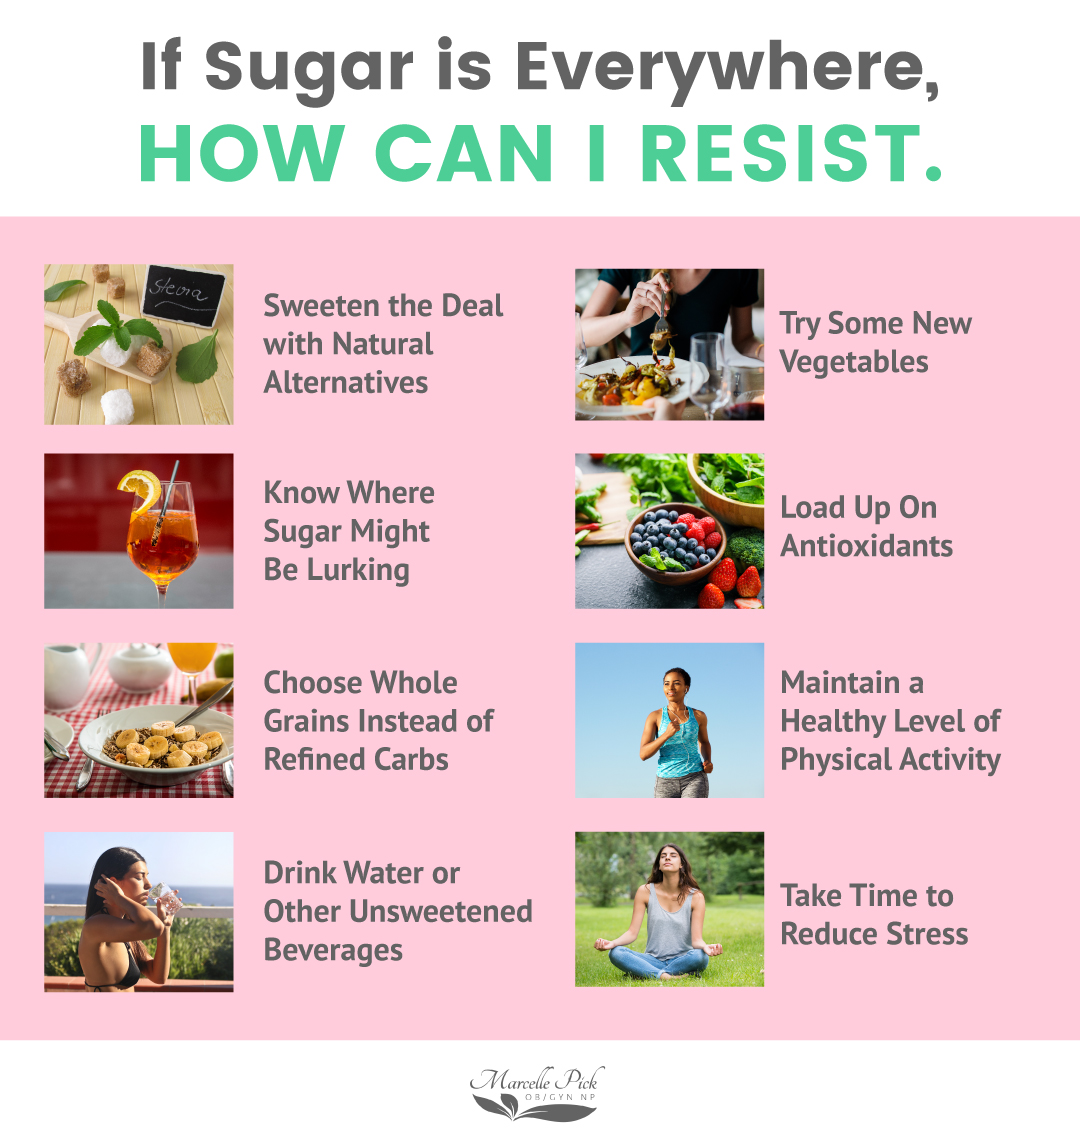 If sugar is everywhere how can i resist infographic